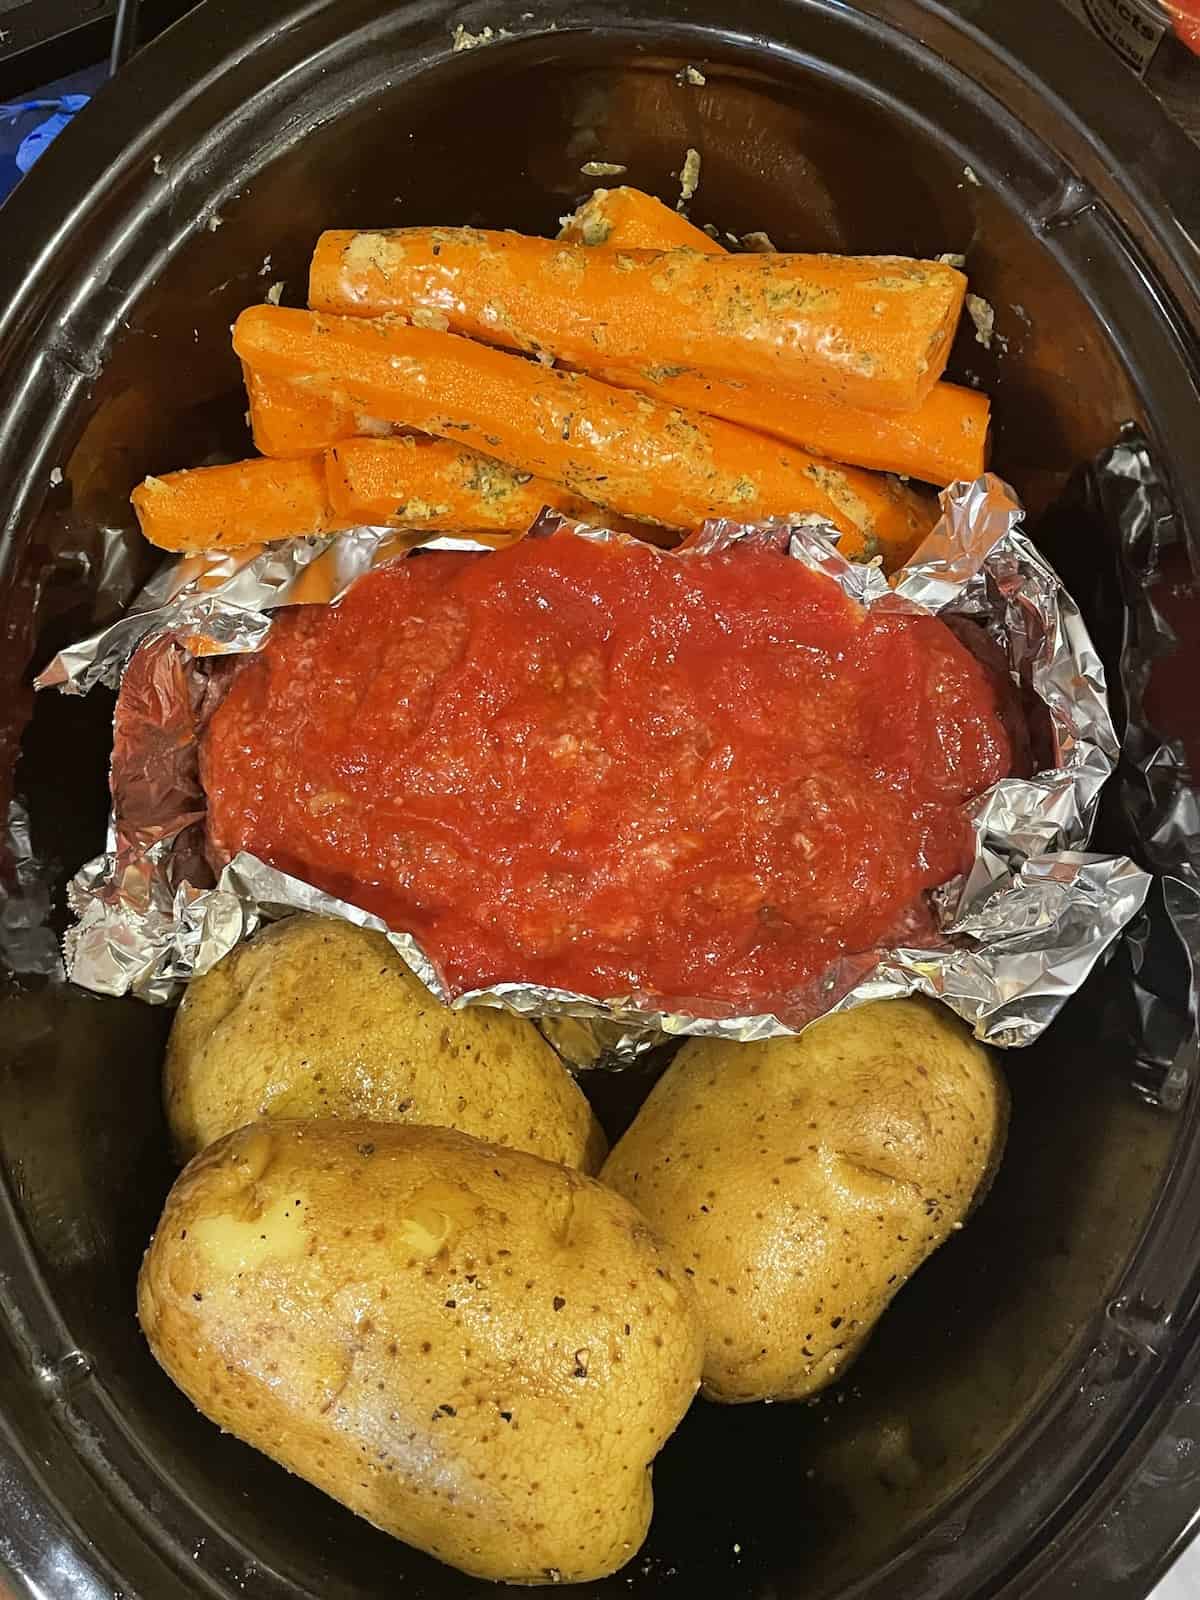 meatloaf, potatoes and carrots in a slow cooker